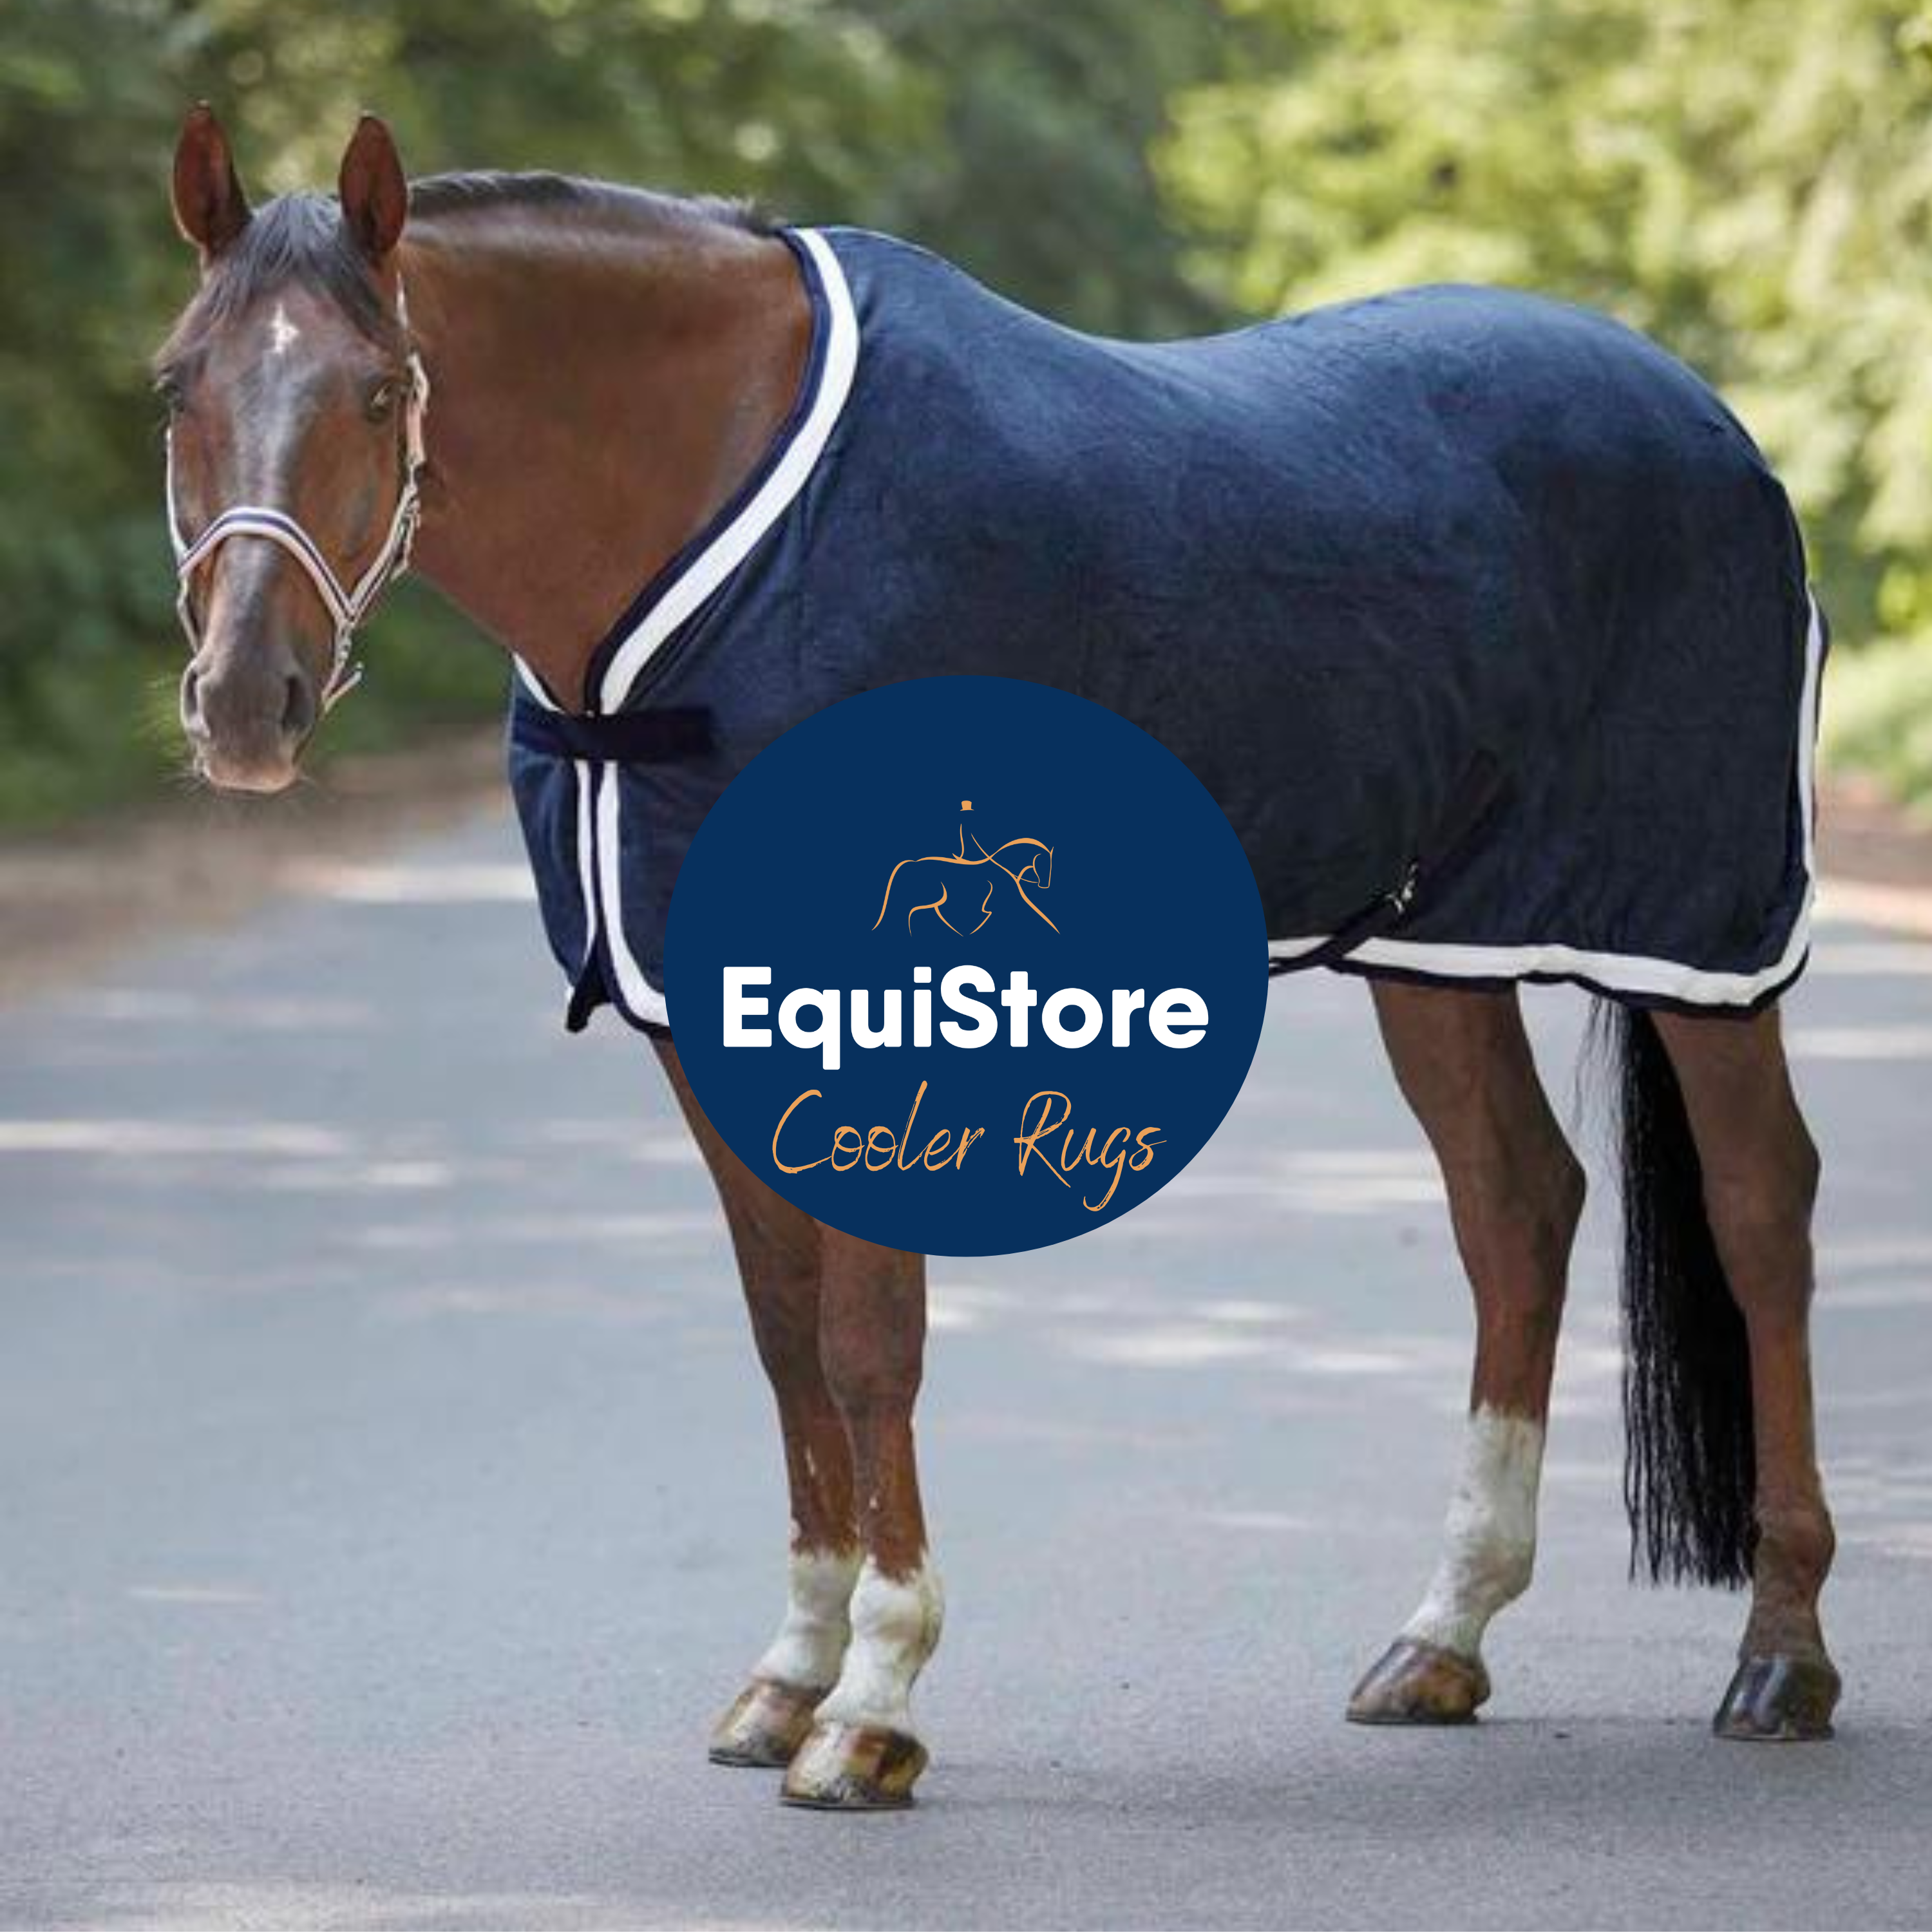 A wide selection of fleece rugs, sweat sheets, cooler sand travel rugs for your horse or pony, available in Ireland from Equistore. 